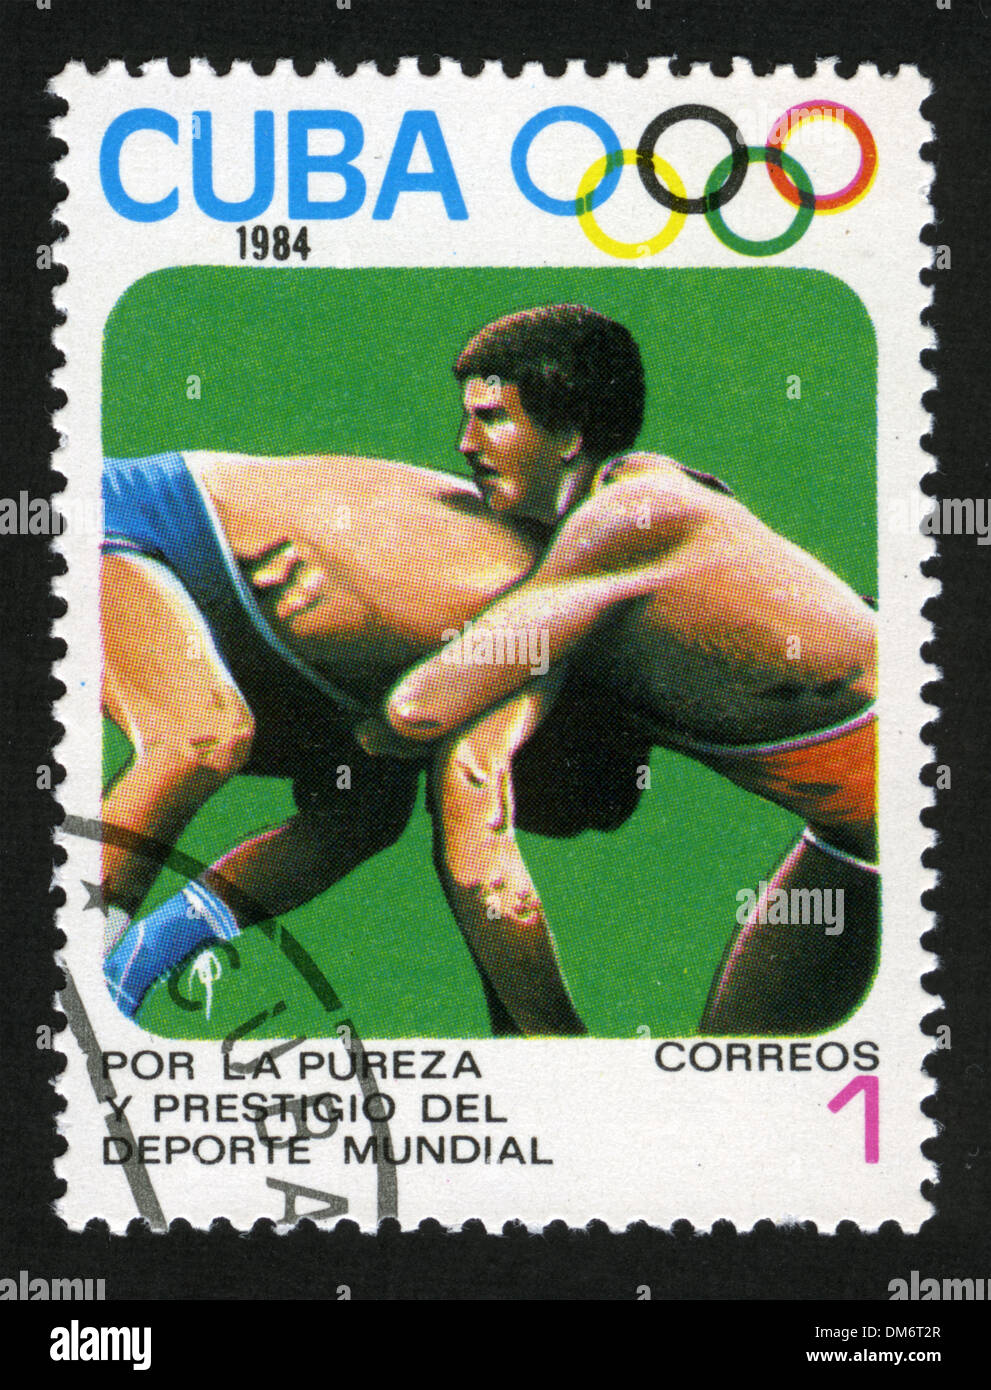 Cuba,post mark,stamp, Postage stamp from Cuba depicting Greco-roman wrestling. Stock Photo